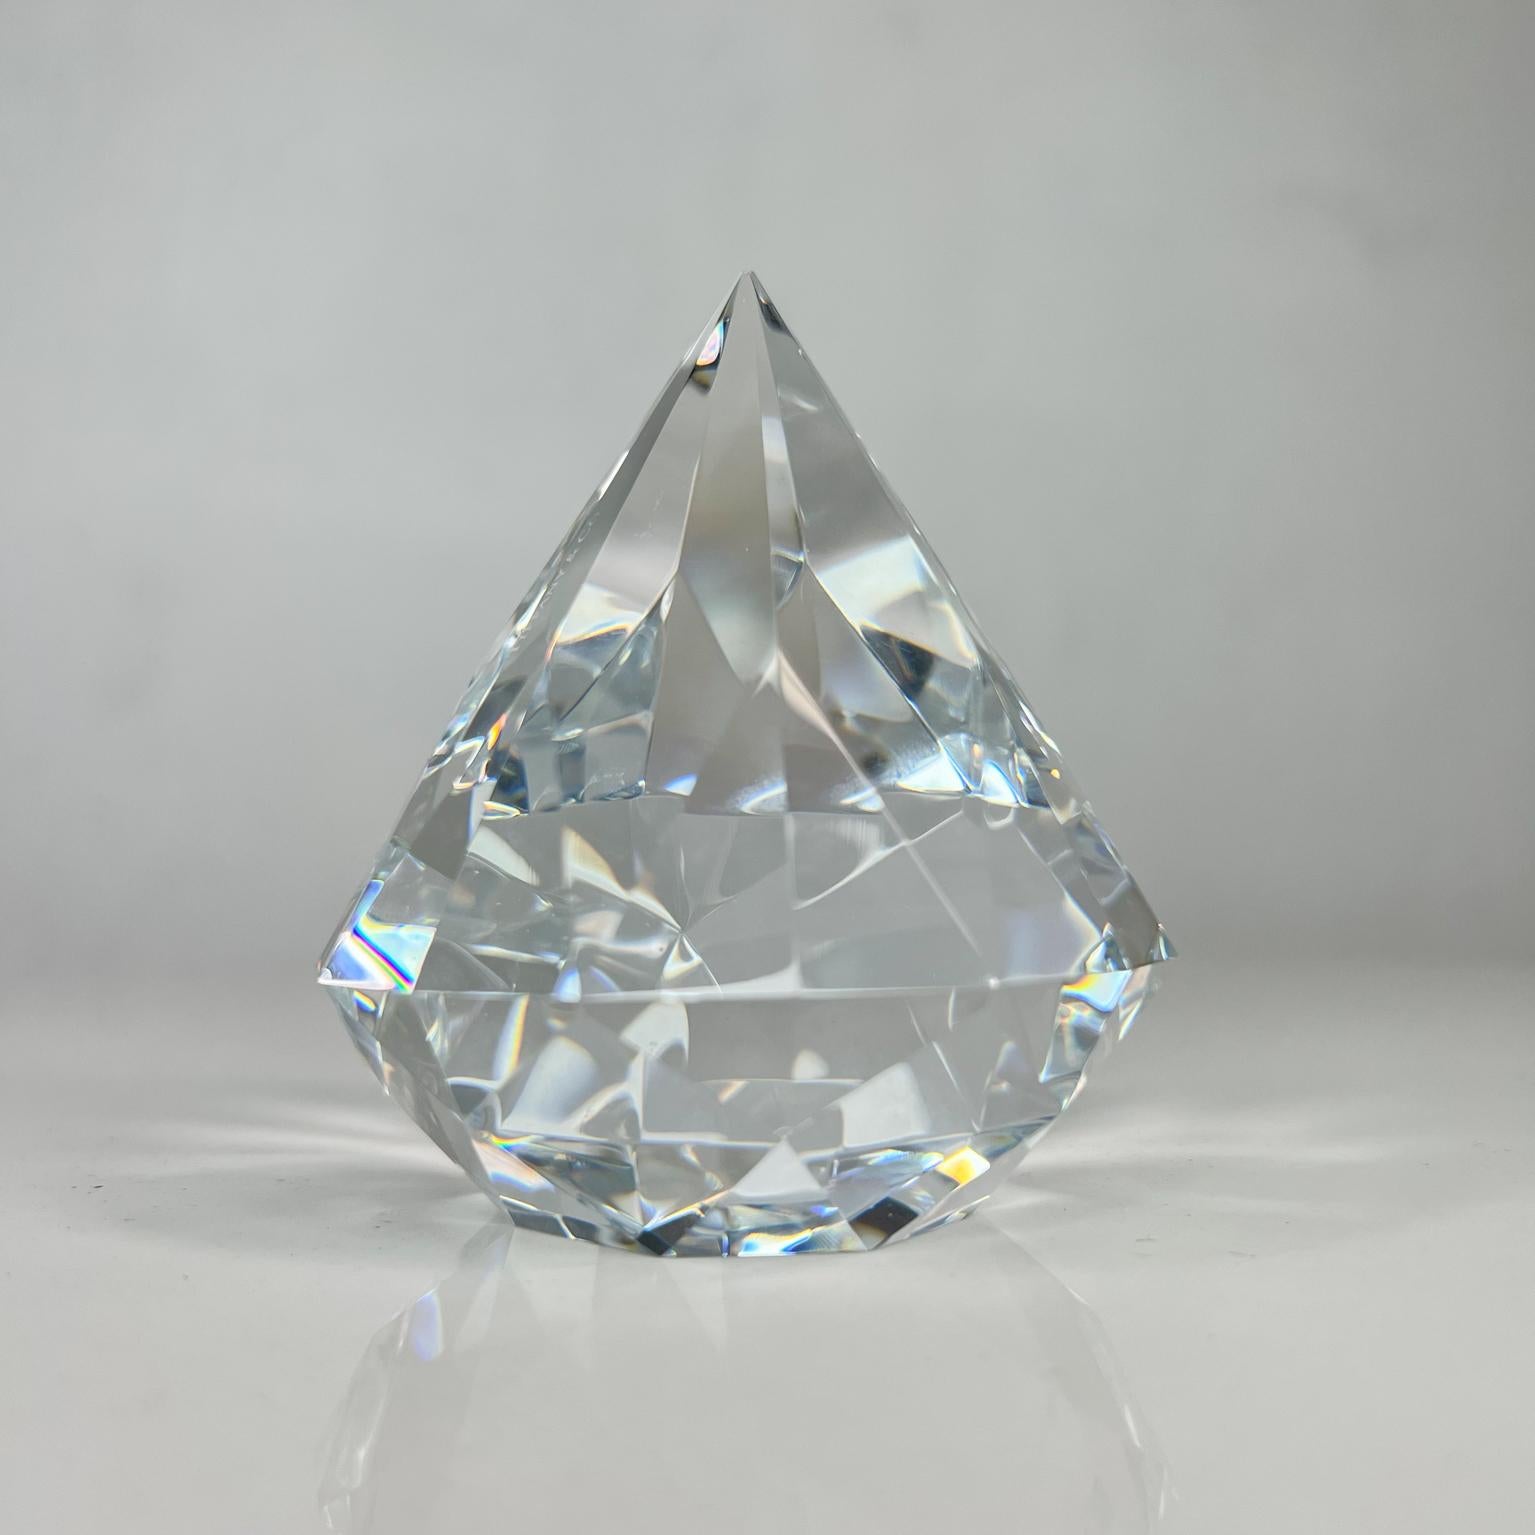 Paperweight.
Tiffany & Co Crystal Art Glass diamond paperweight sculpture
approximately 4 Hx 3.5
Signed by Tiffany and Co.
Preowned original good vintage condition.
Refer to images provided.

